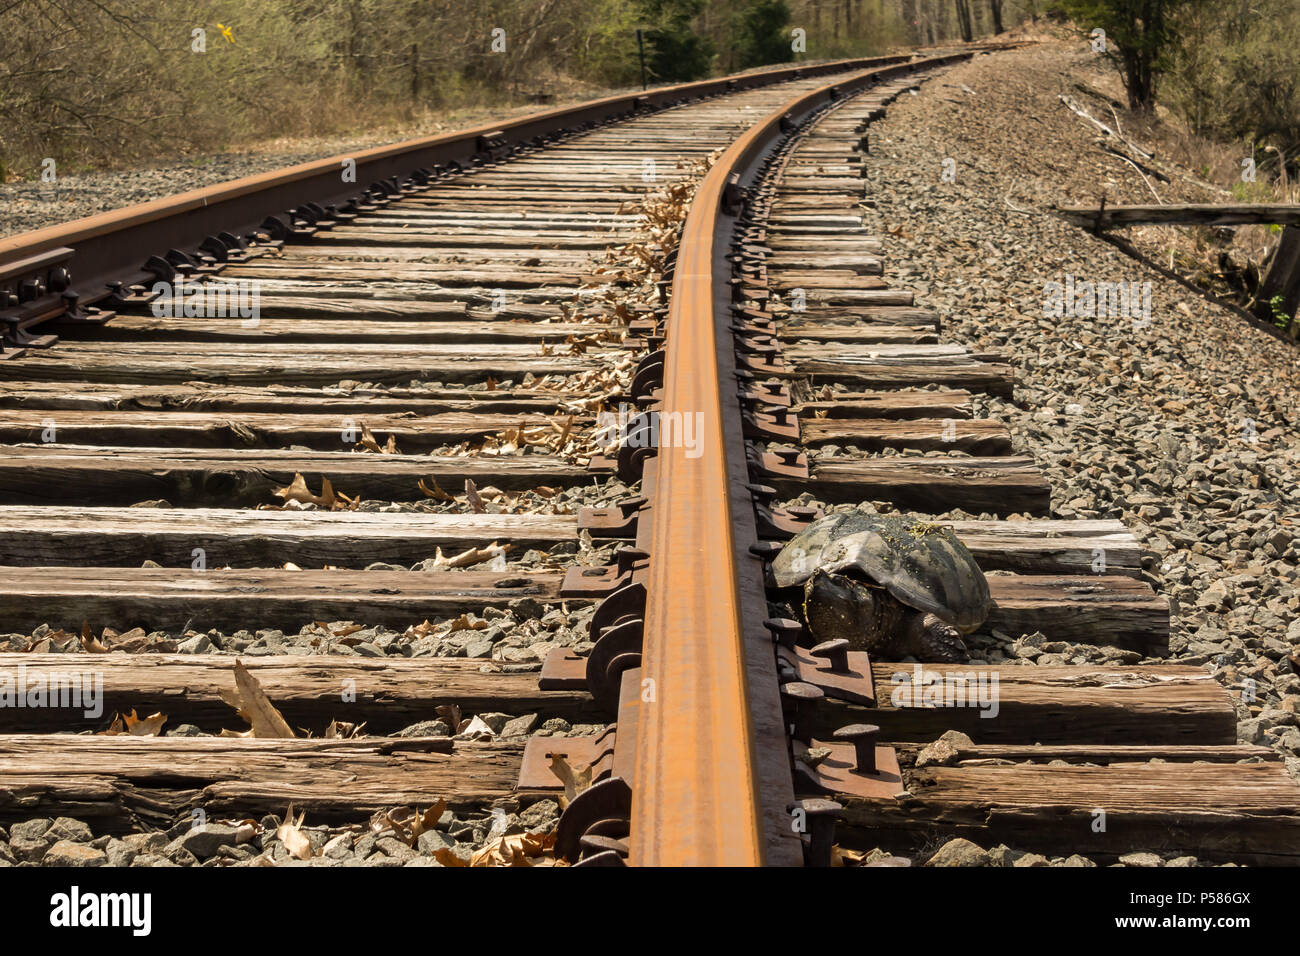 A Snapping Turtle desperately trying to cross the train tracks to nest on the other side. Stock Photo